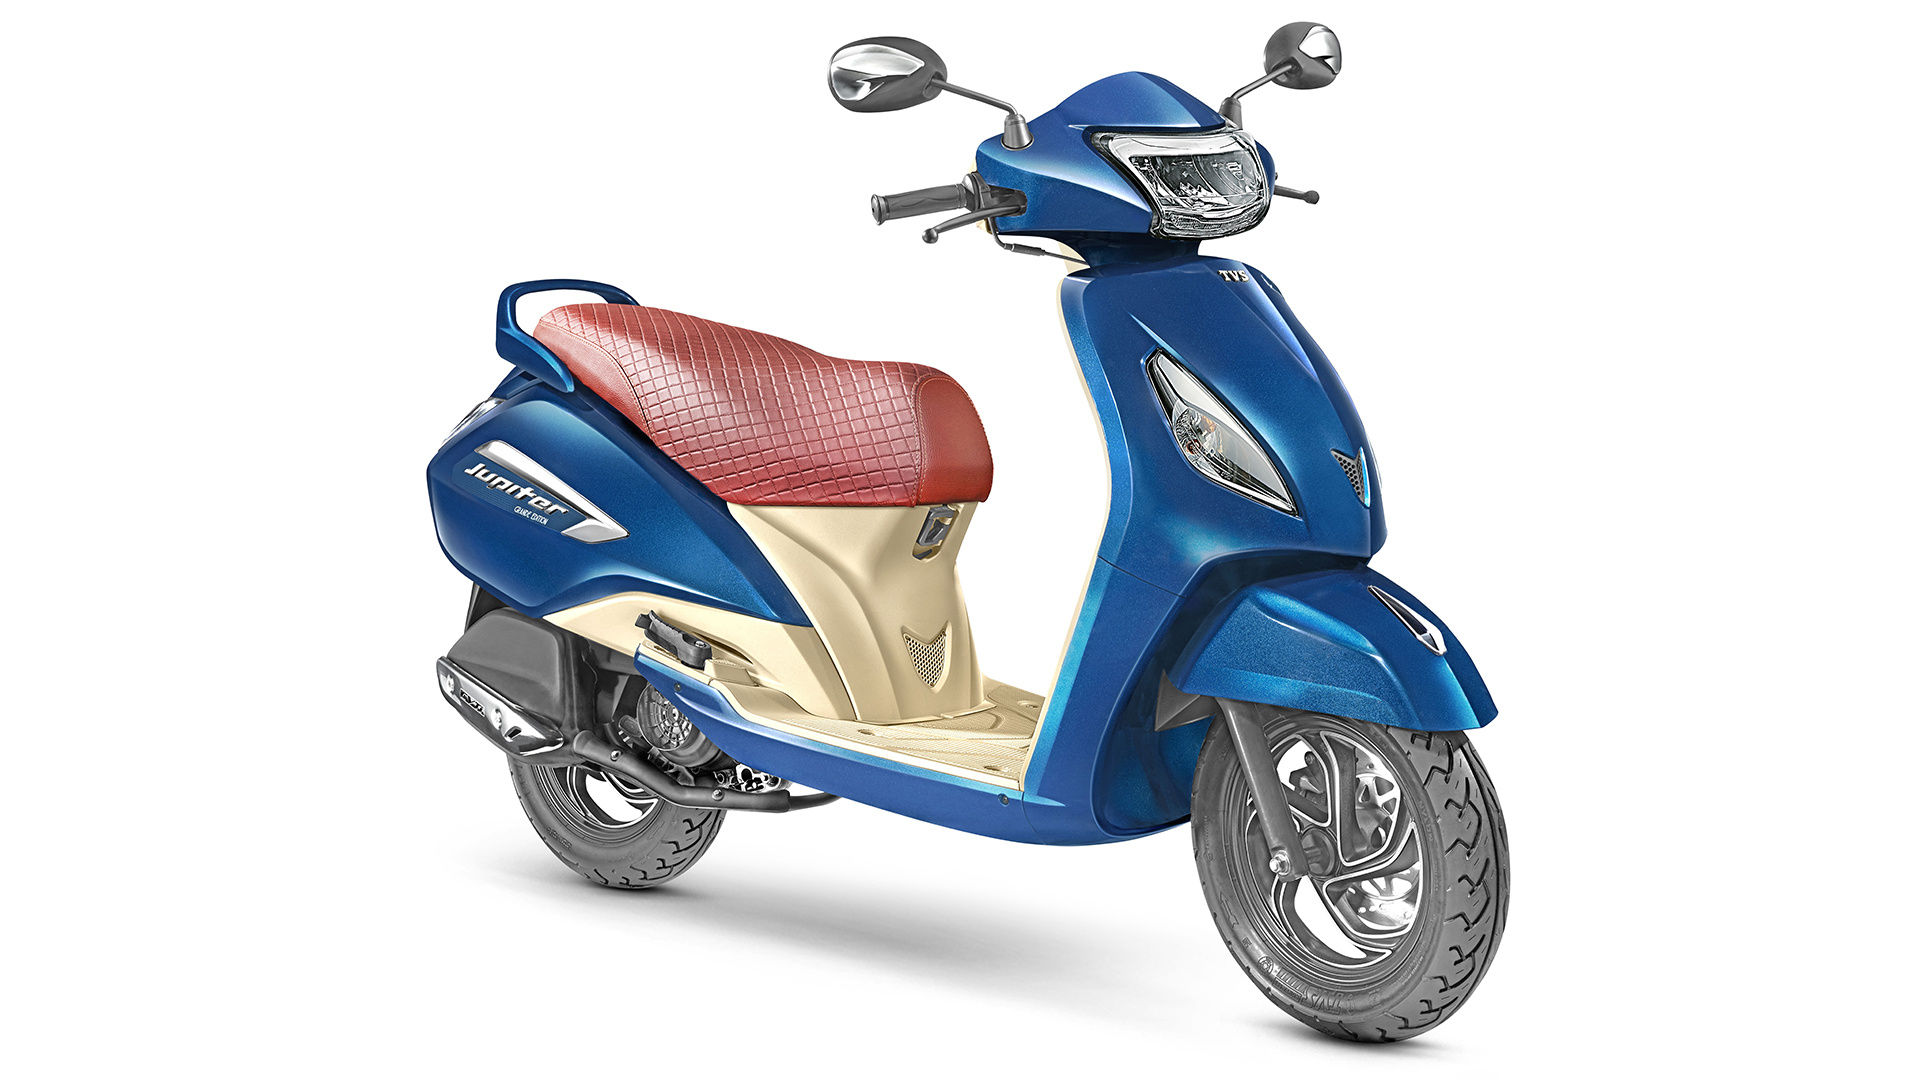 Scooty Tvs Bikes New Models 2018 Free Robux Promo Codes Yummers